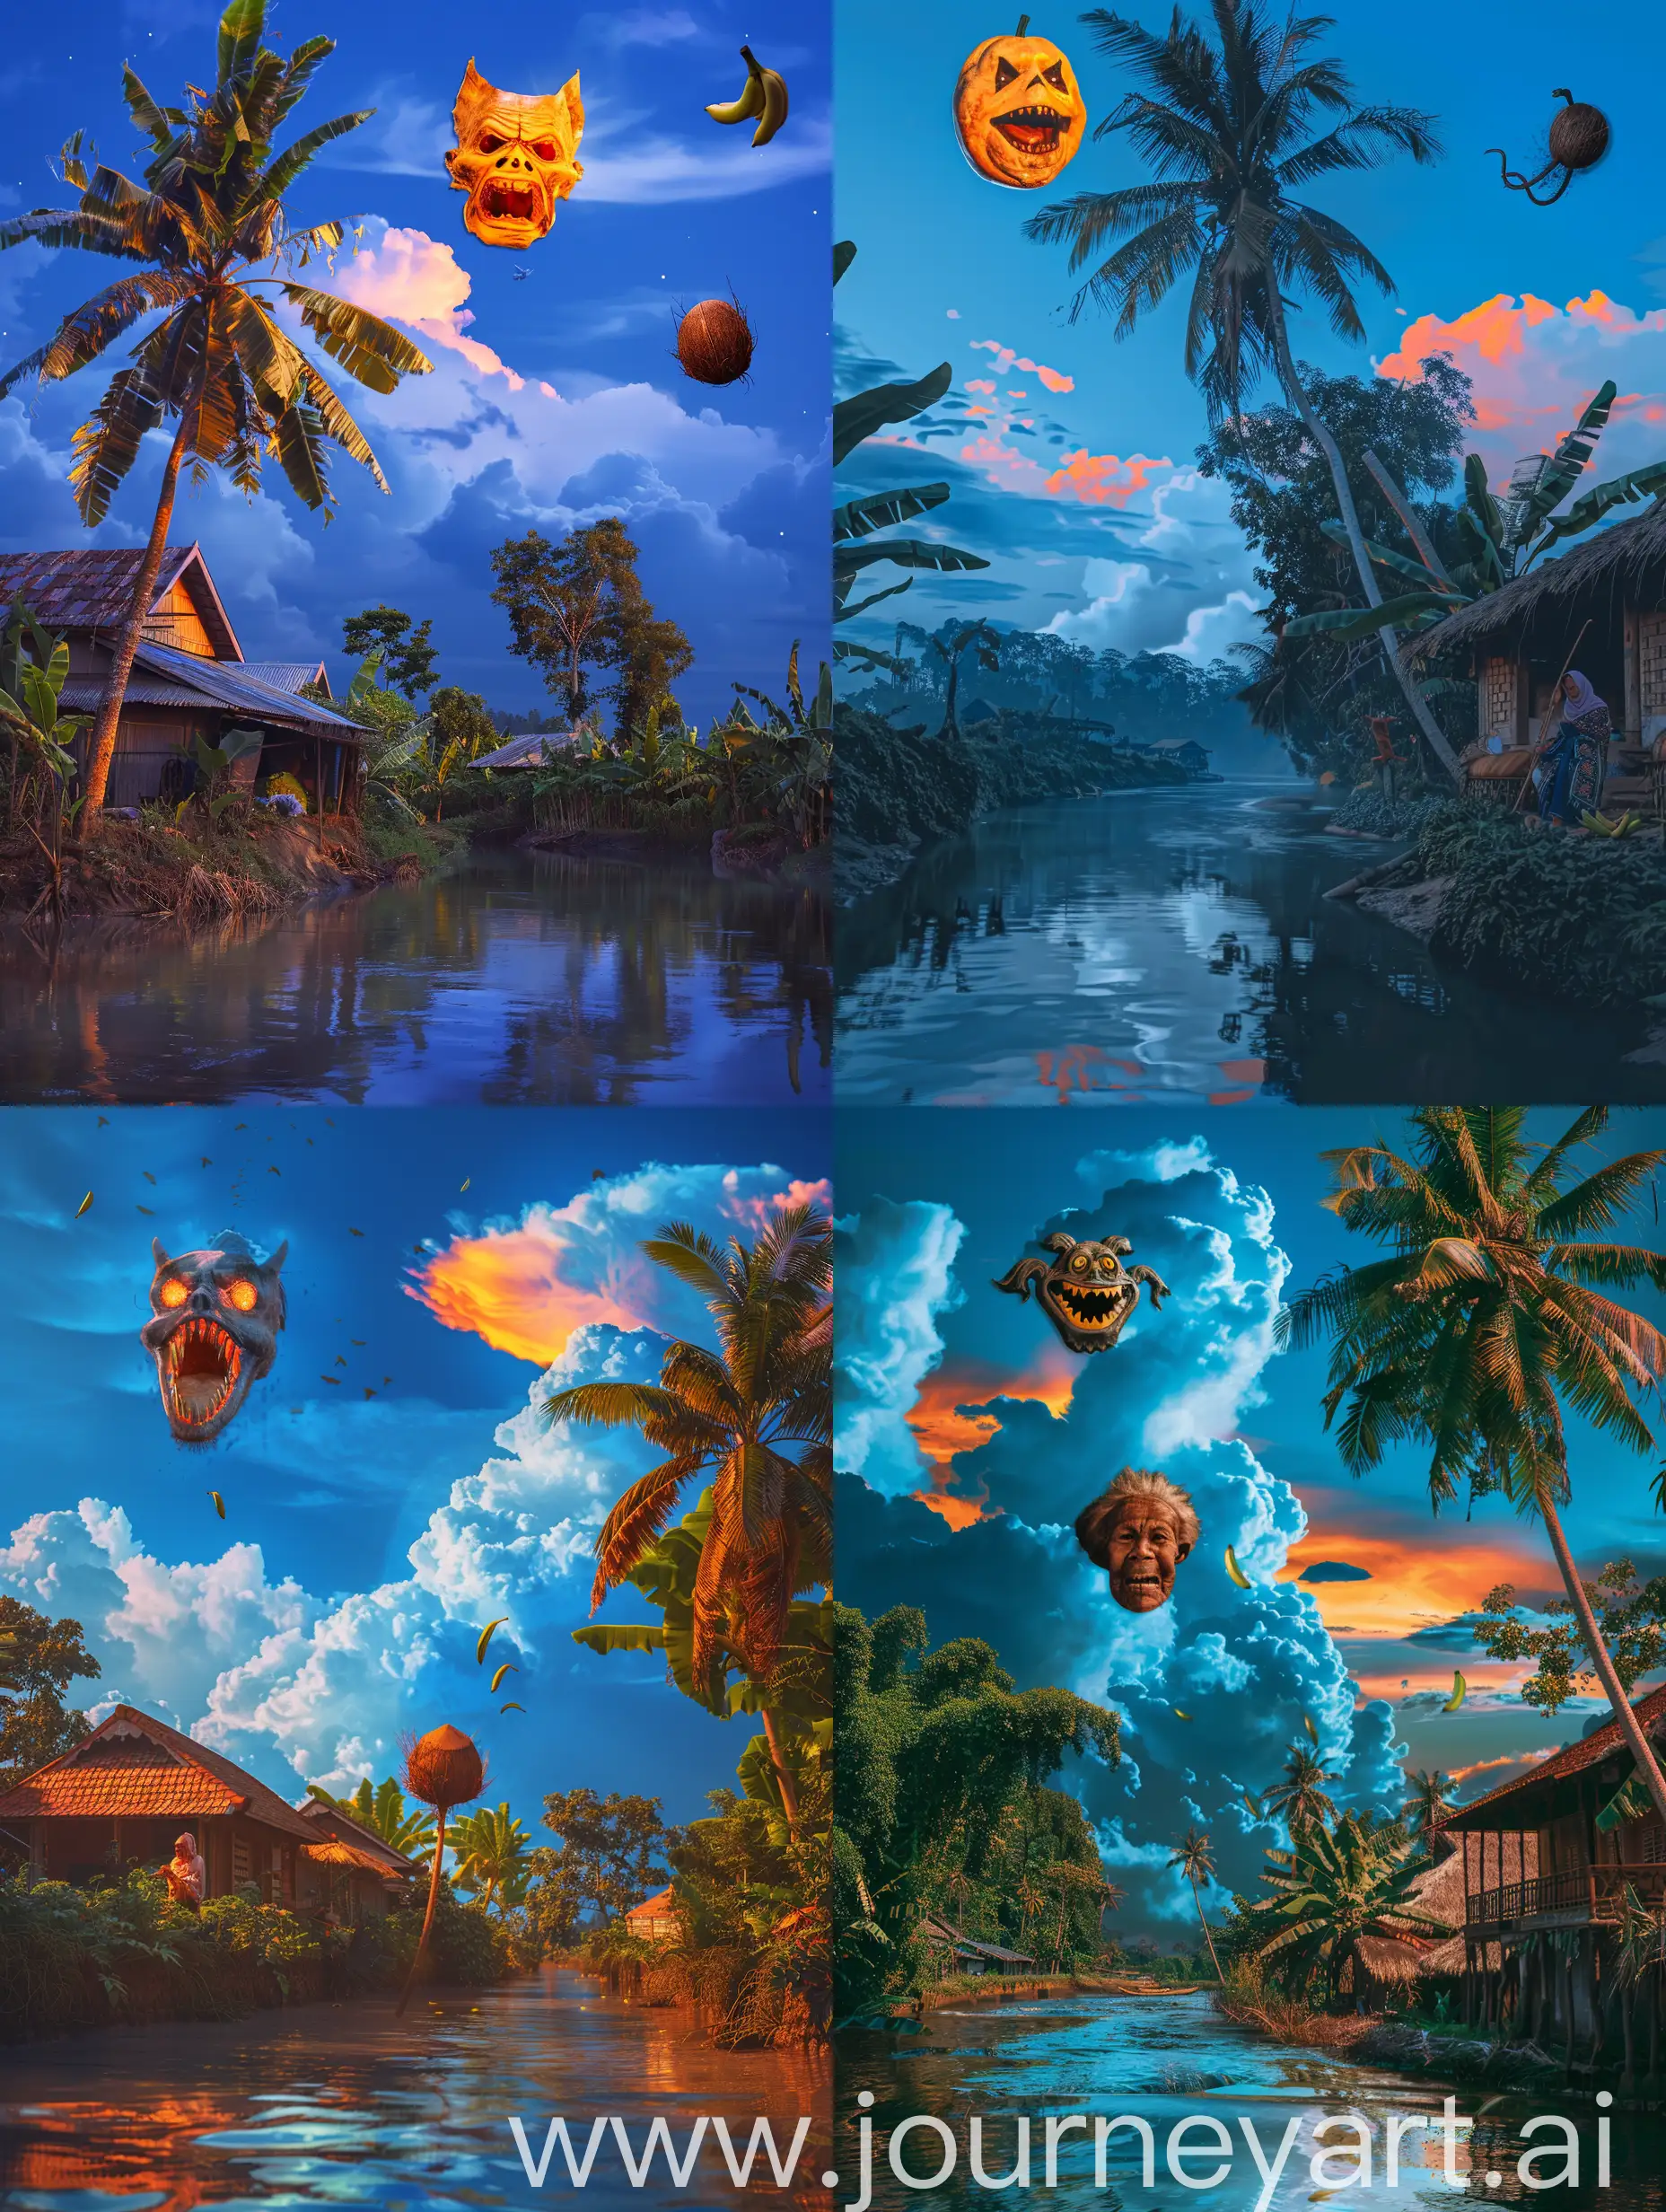 village atmosphere at dusk. blue sky there is an orange glow behind the beautiful clouds. the river flows calmly. there is a reflection of the image in the water. coconut tree. banana tree. an old malay woman, scary face flying in the air. realistic photography. ultra realistic. 24K full HD.